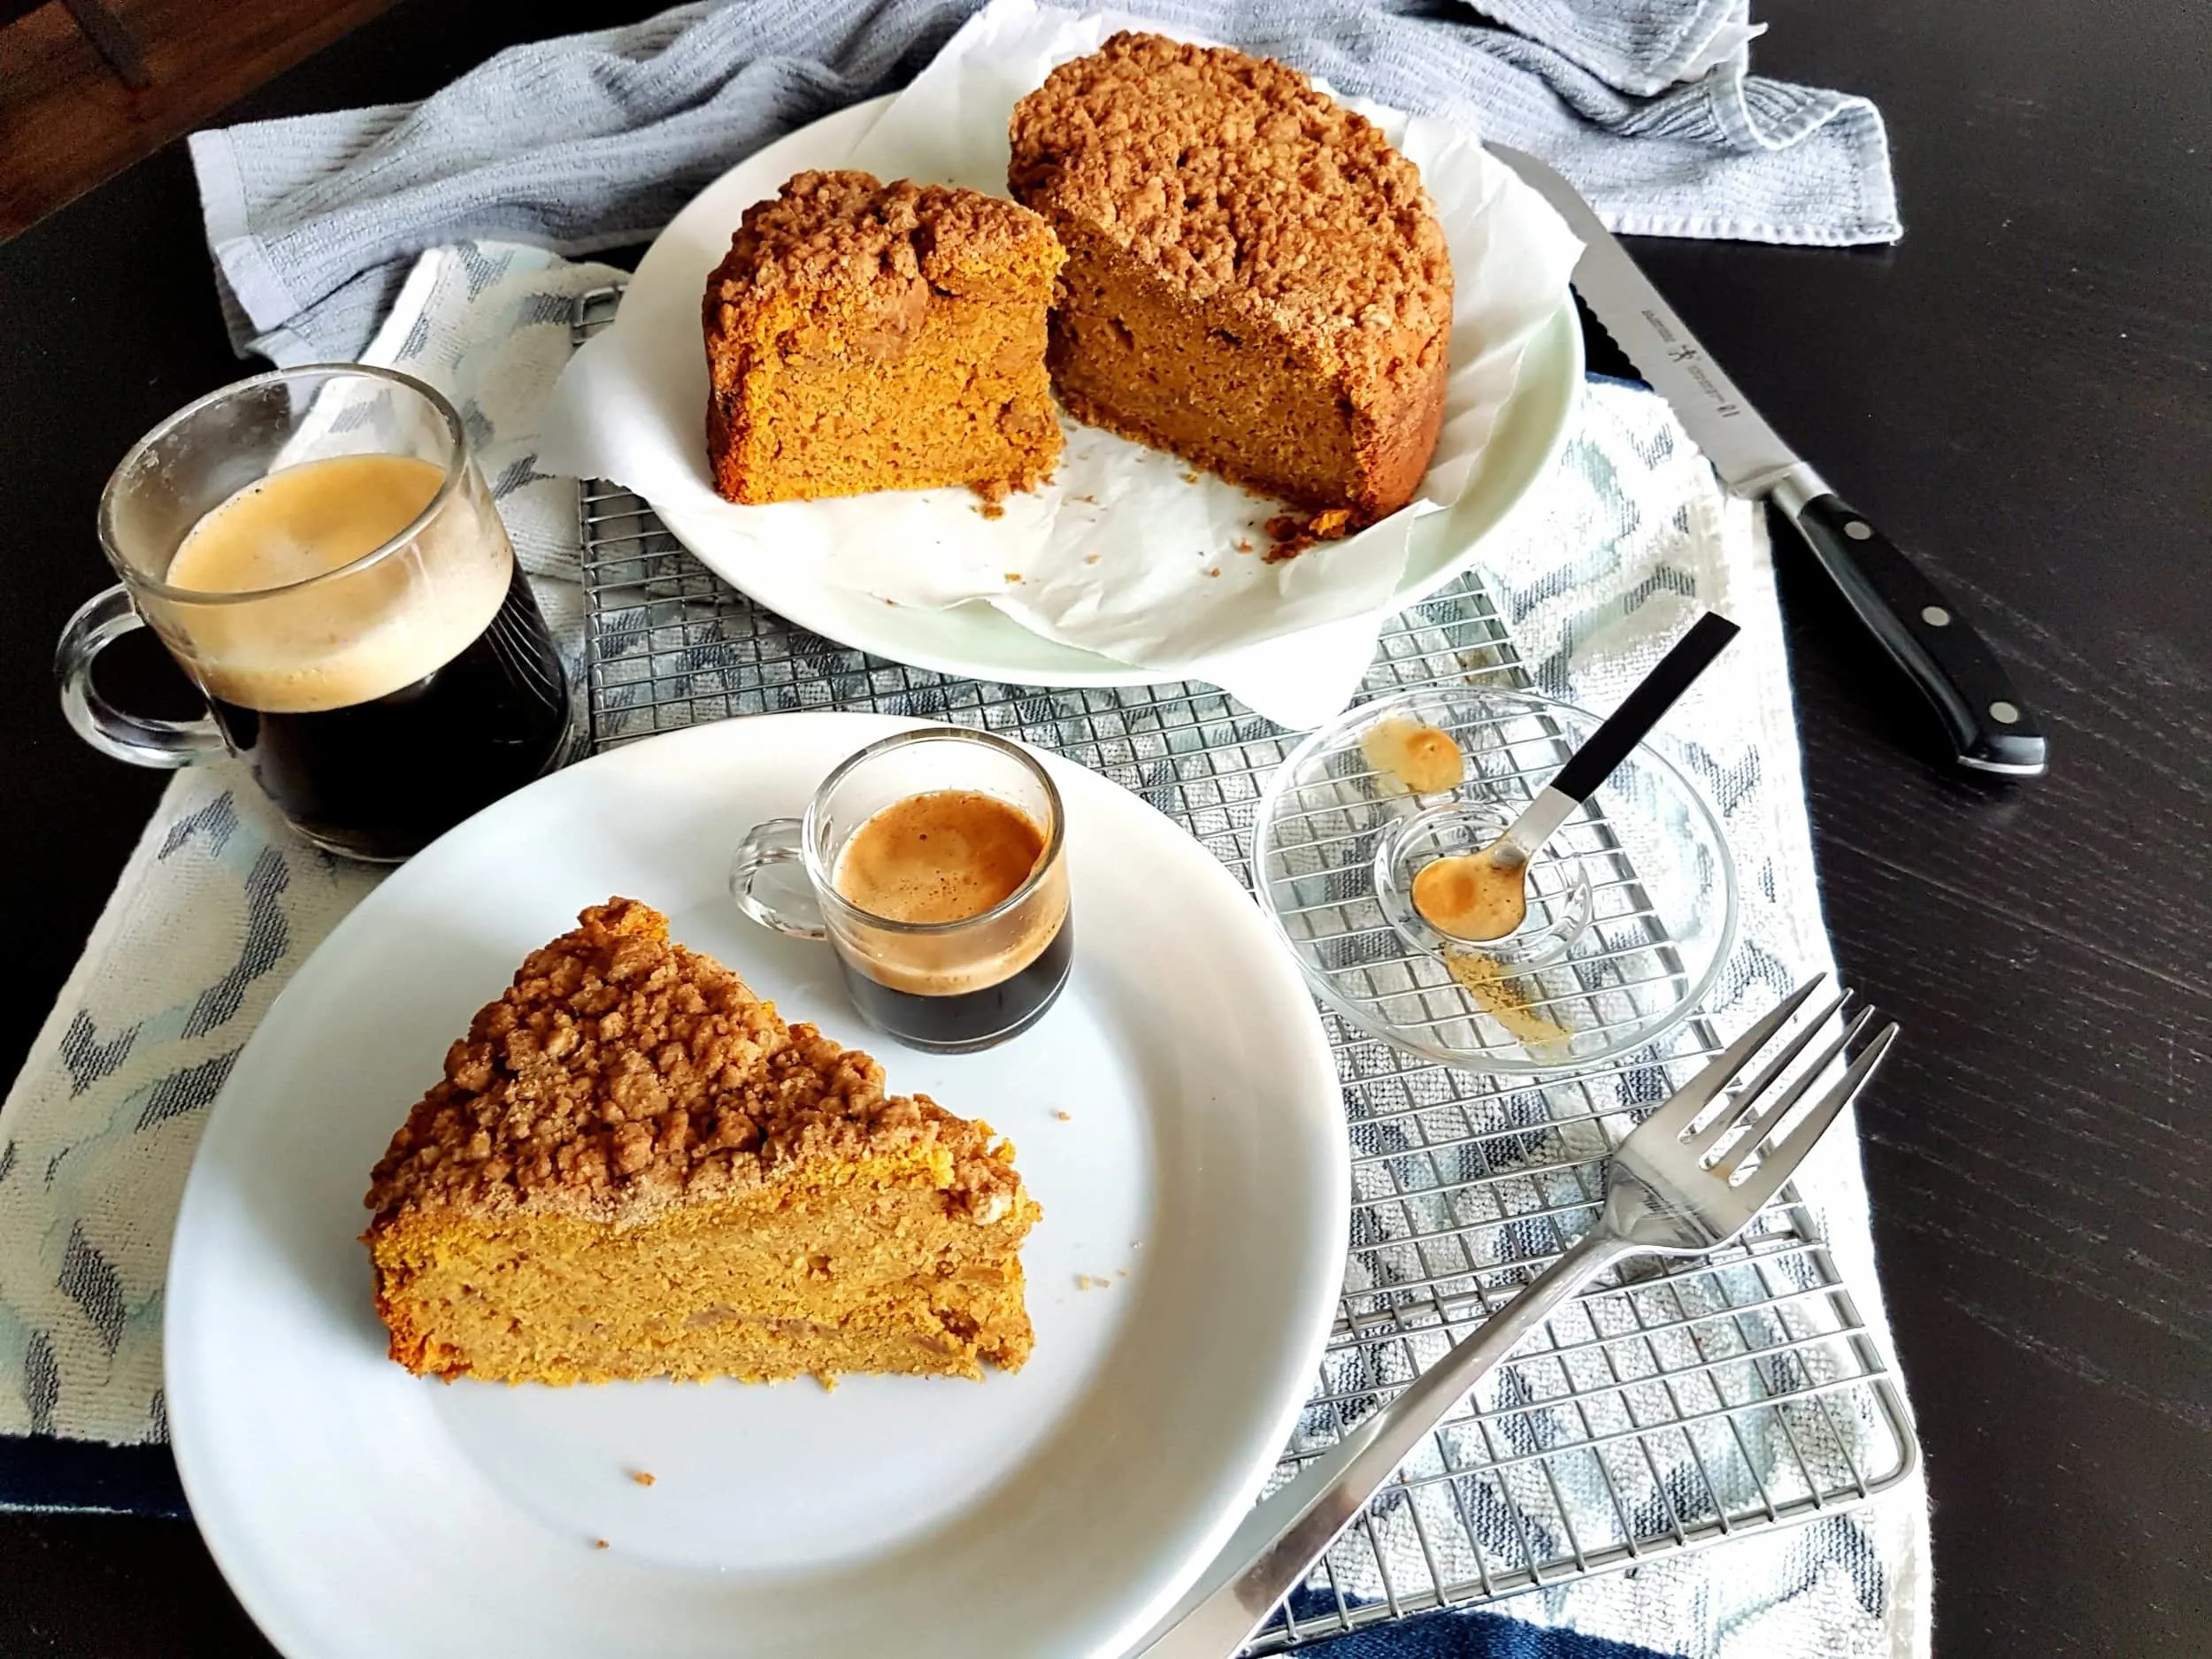 A slice of Pumpkin Sour Cream Coffee Cake with a cup of coffee.